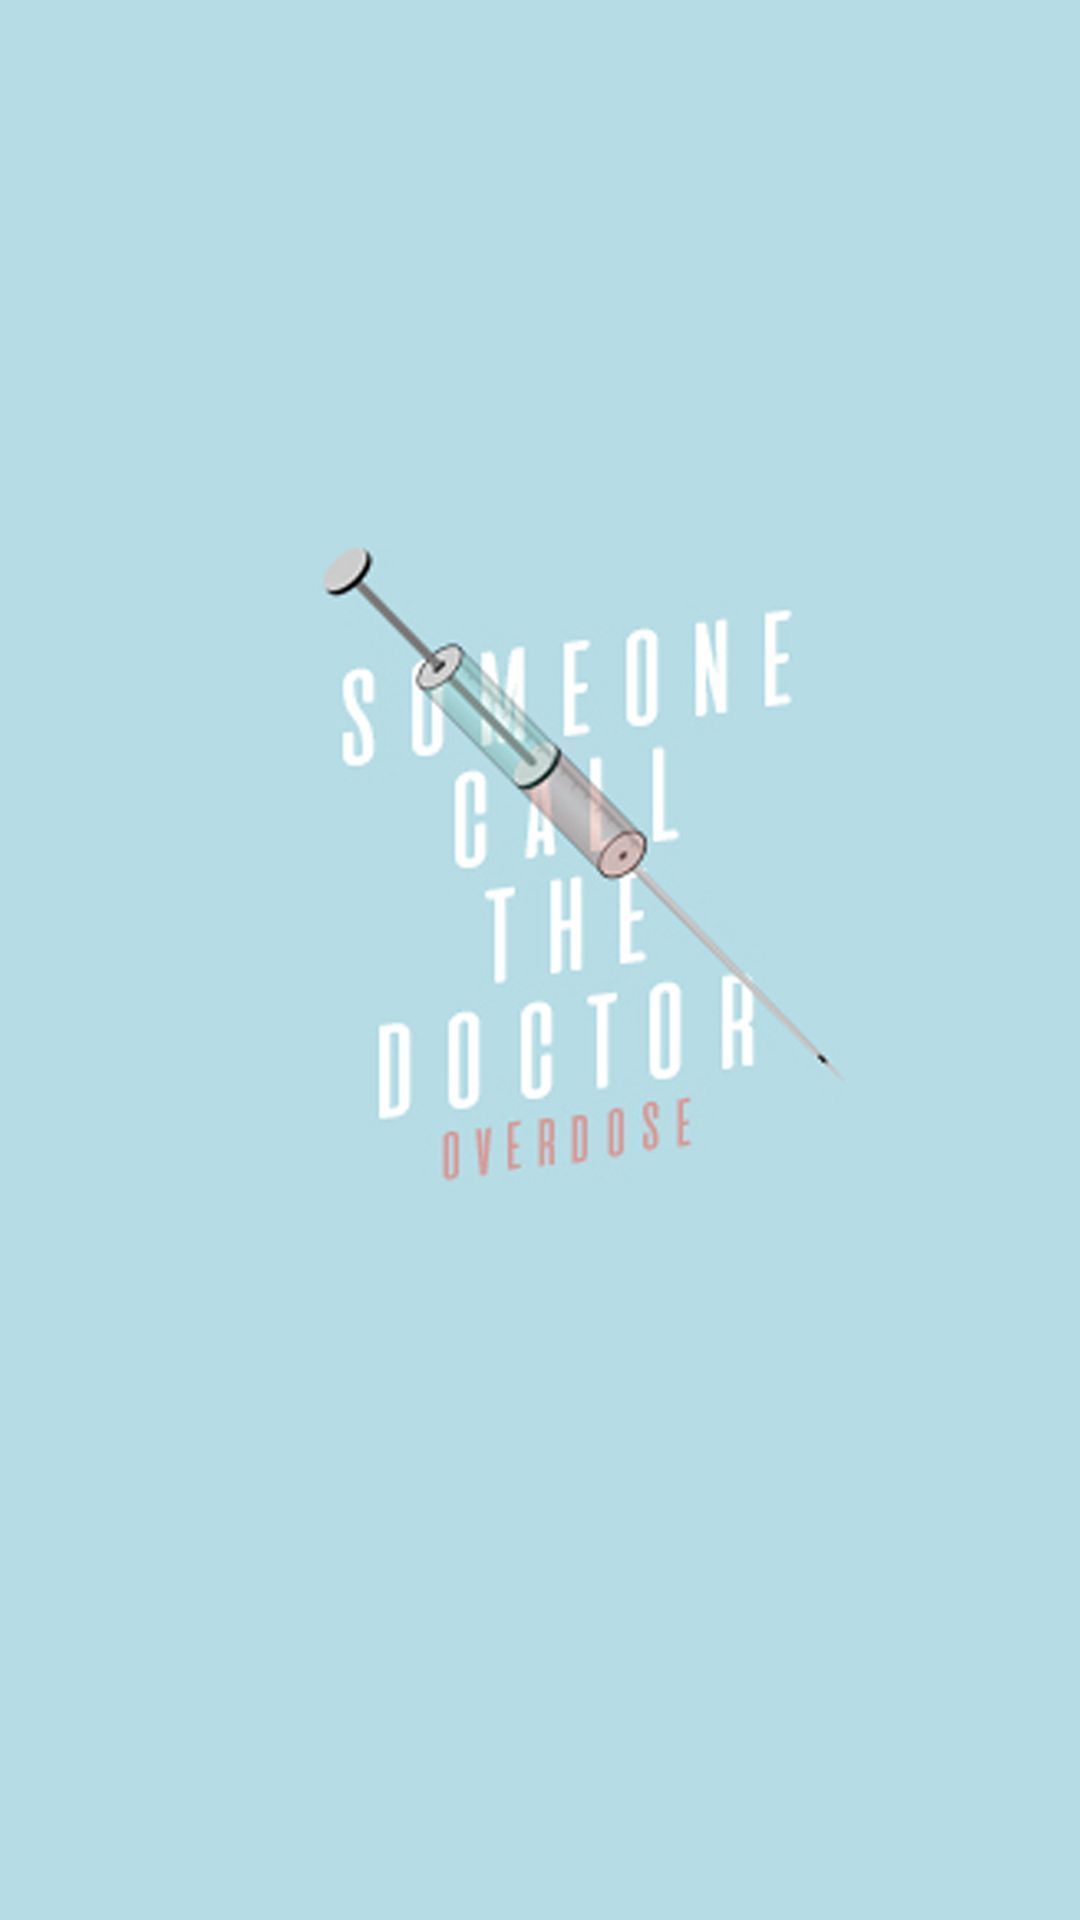 Future Doctor Wallpapers